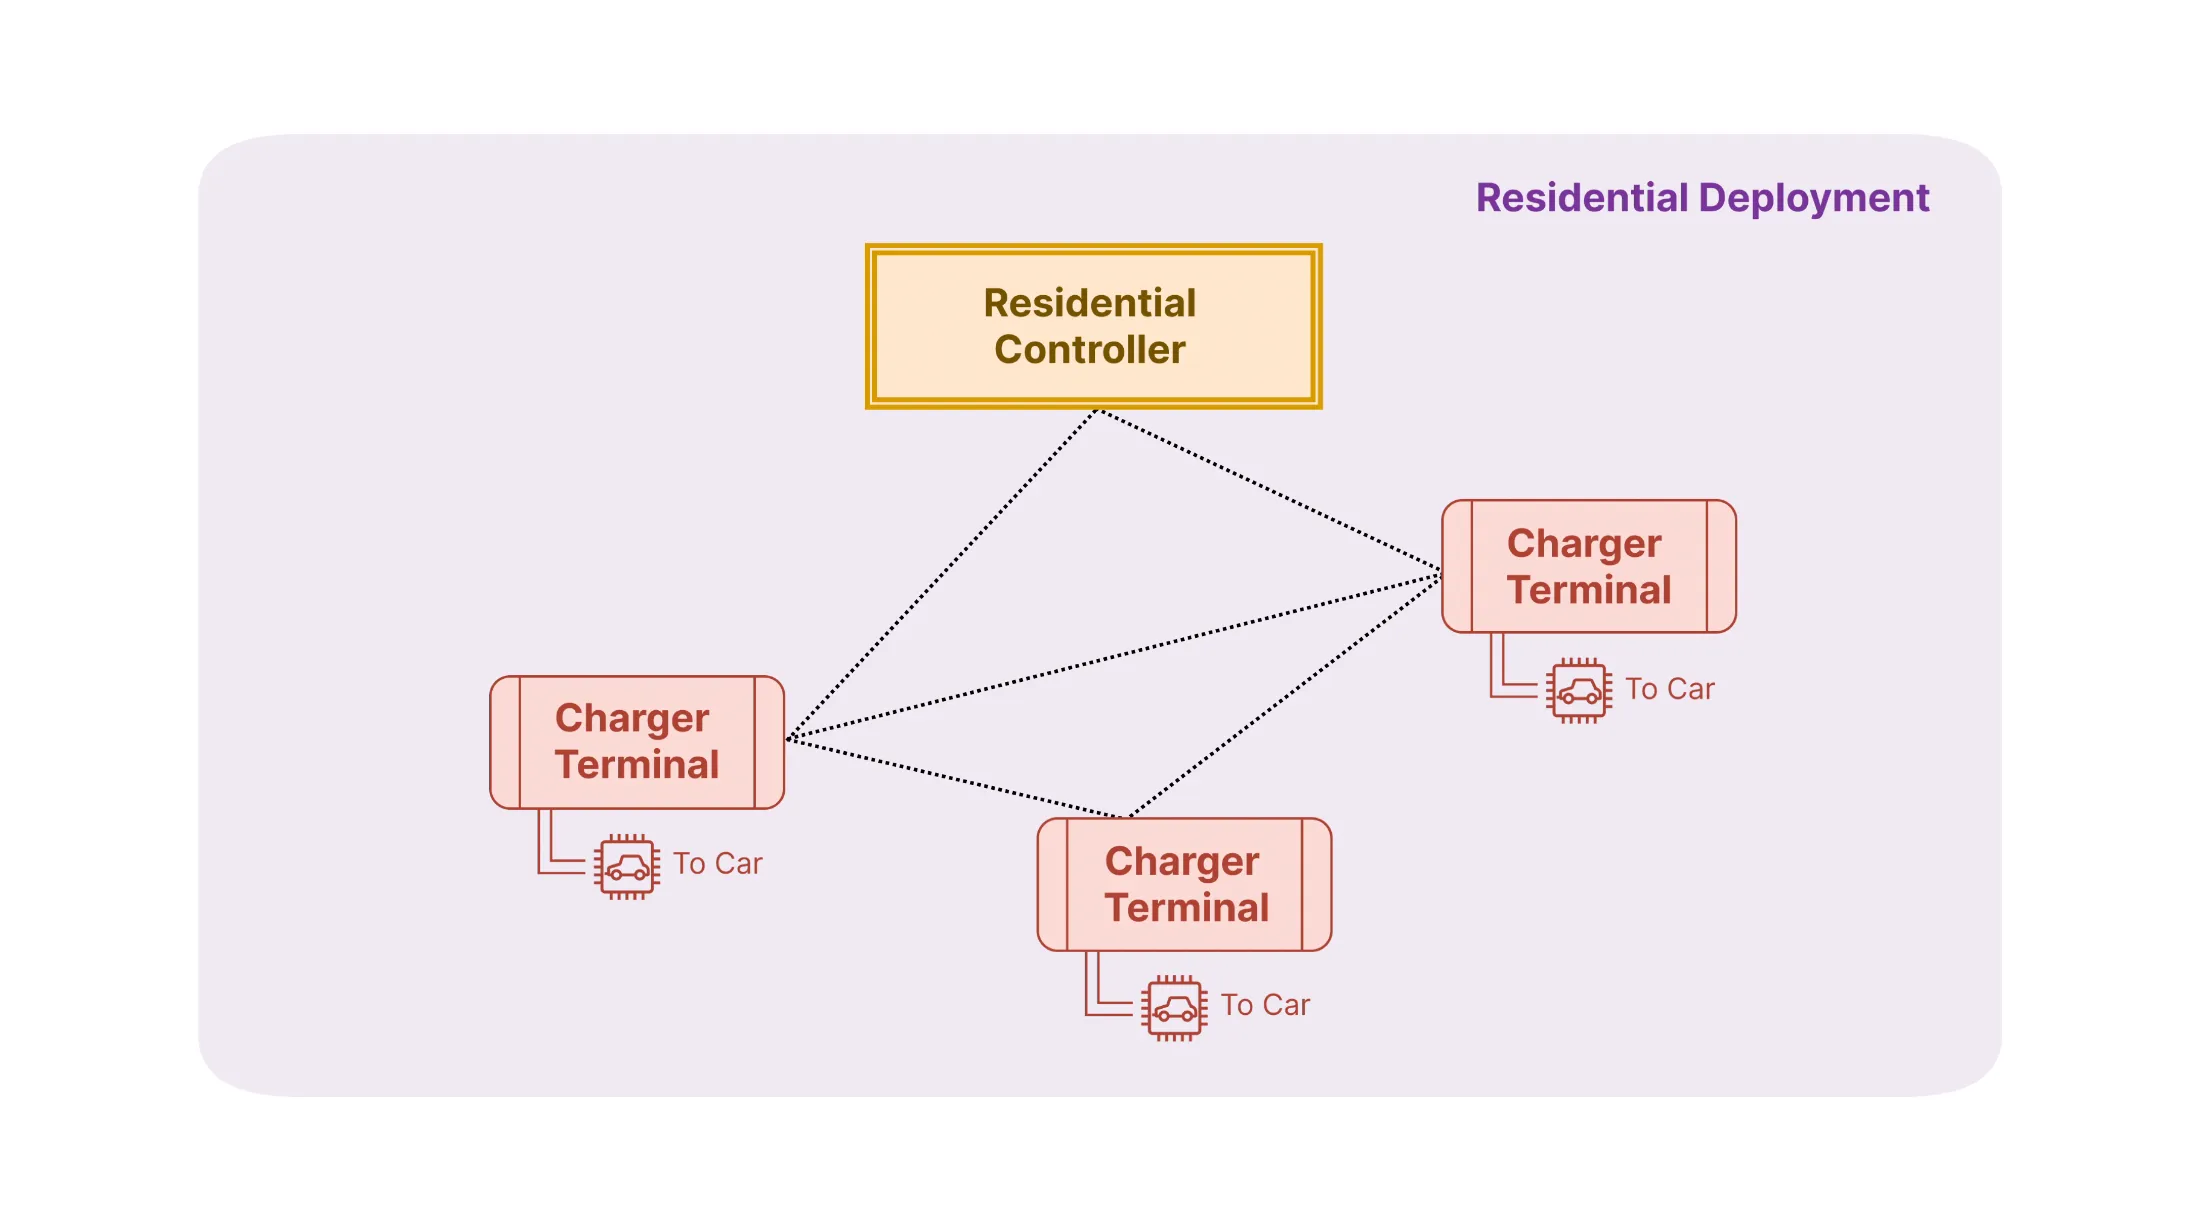 The topology diagram for a residential deployment